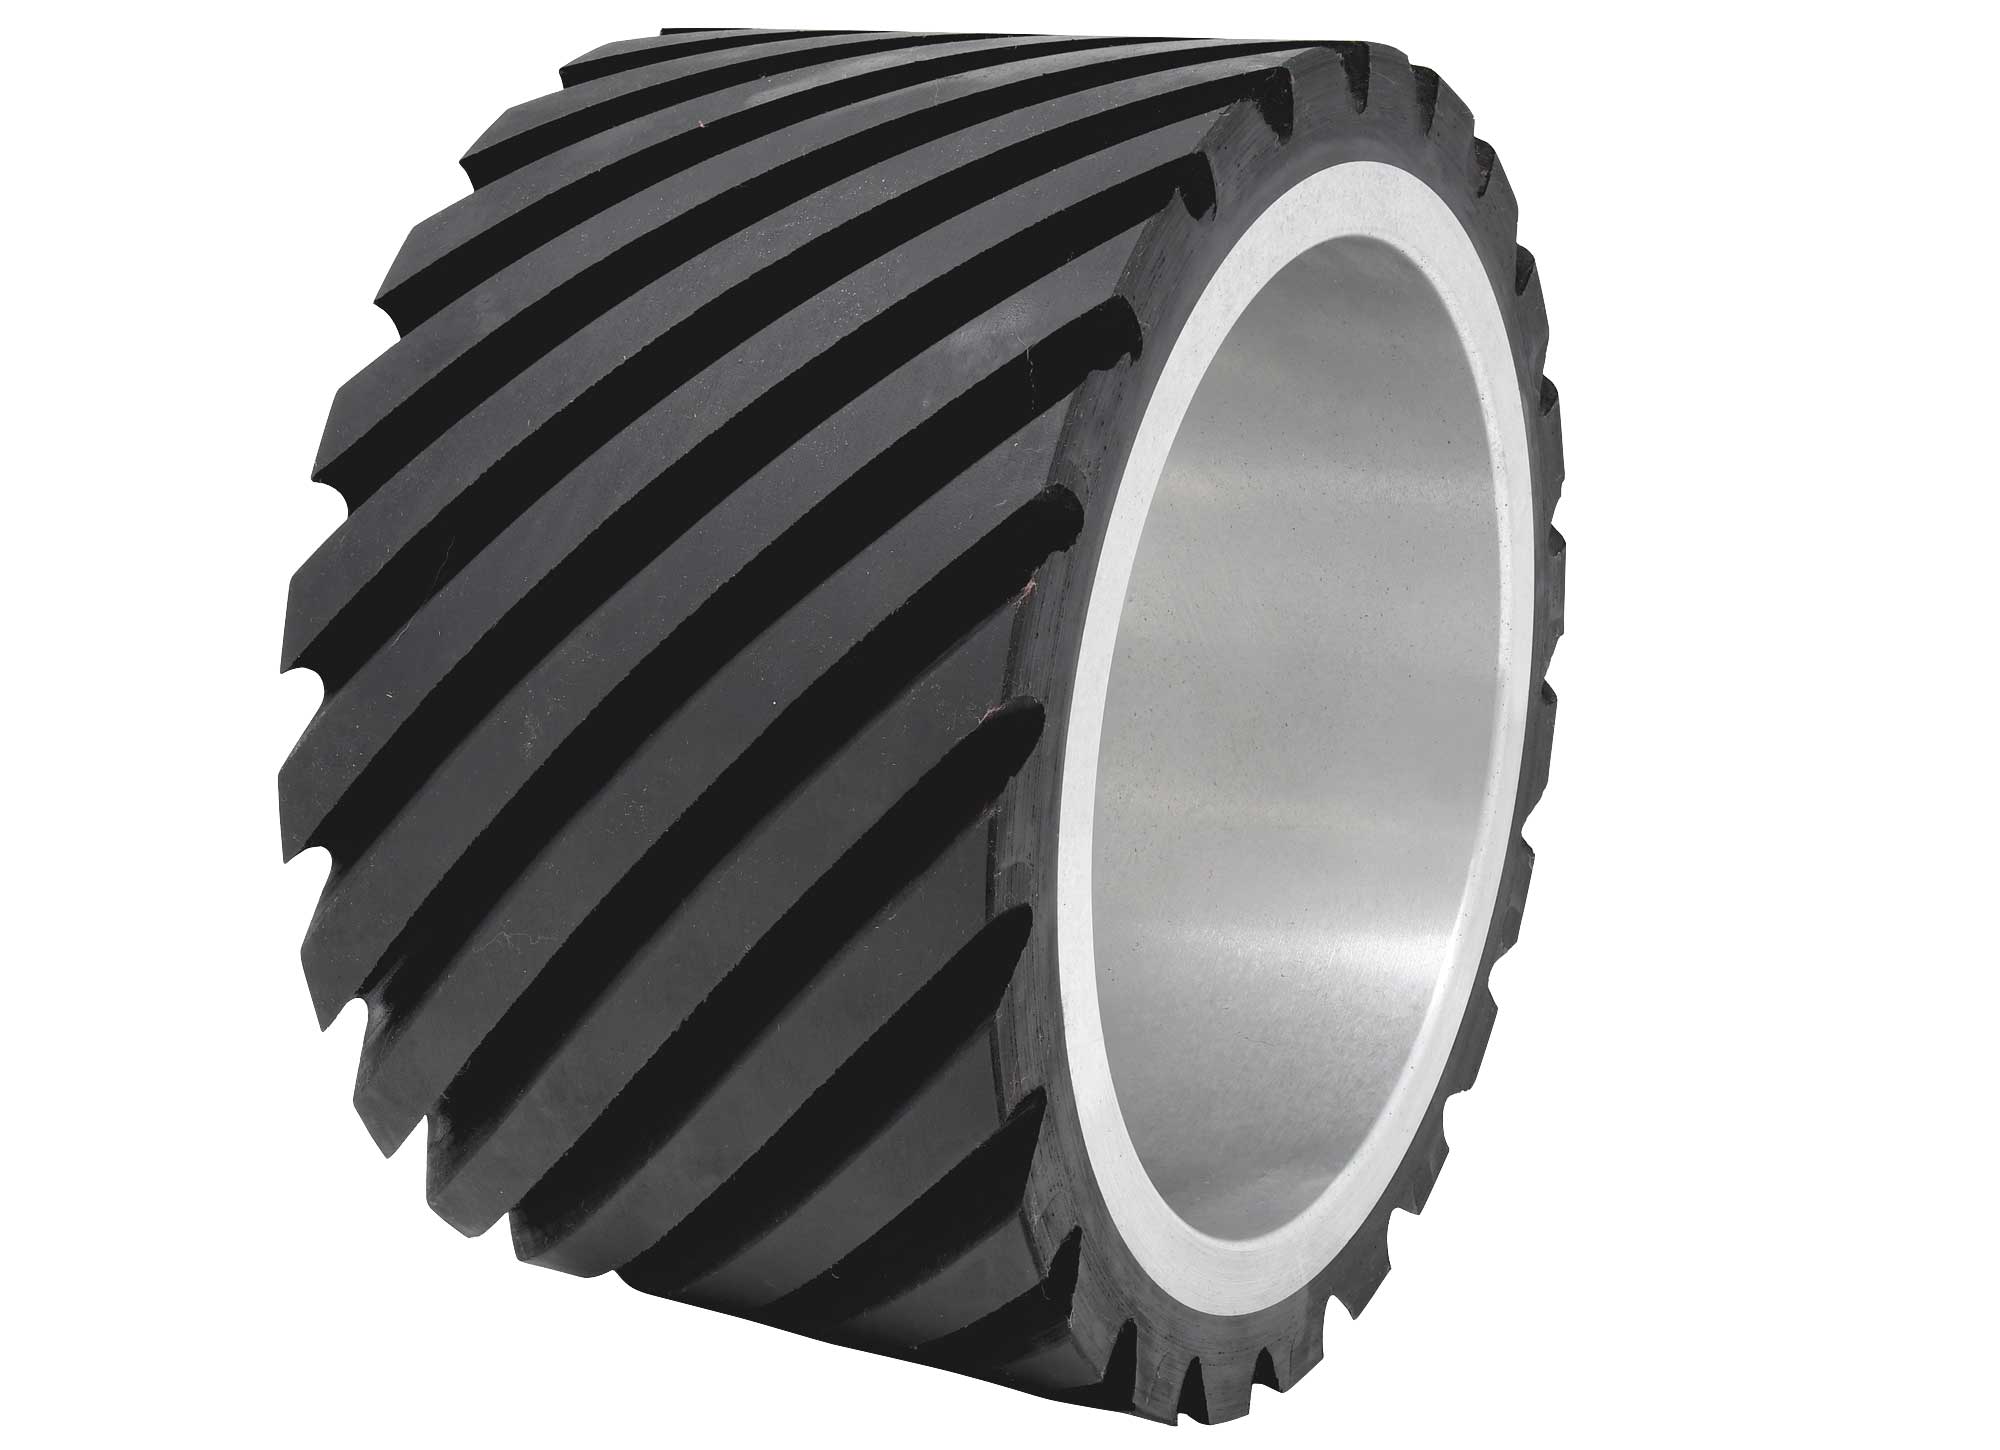 802-4-S-55 Serrated Contact Wheel, 7 x 4, 55 duro